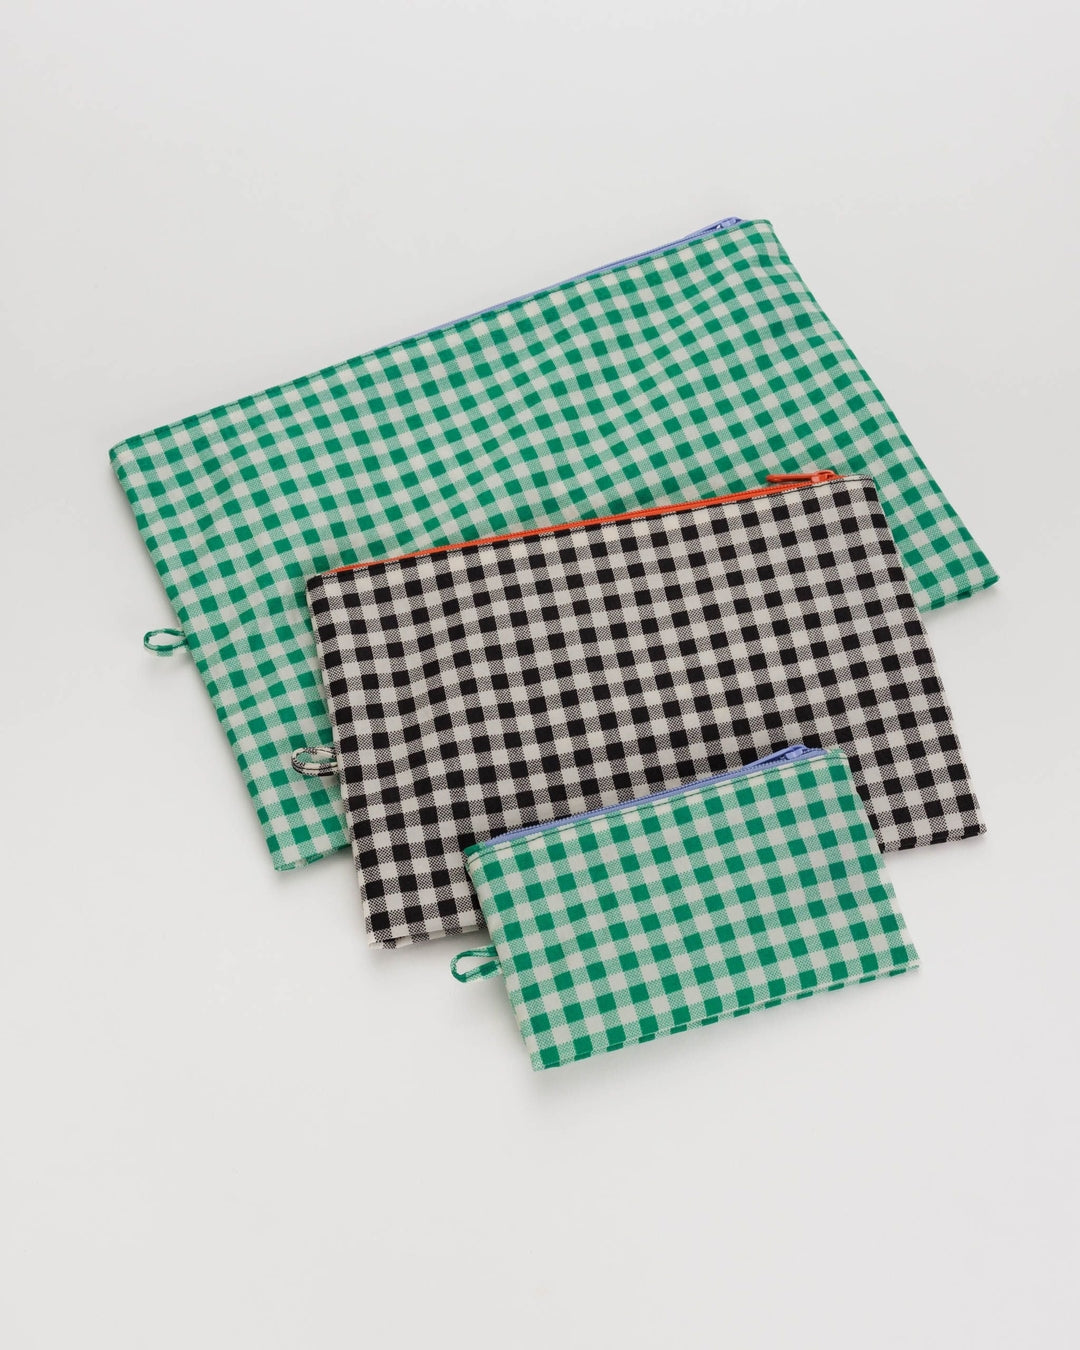 Go Pouch Set - Gingham [PRE ORDER]